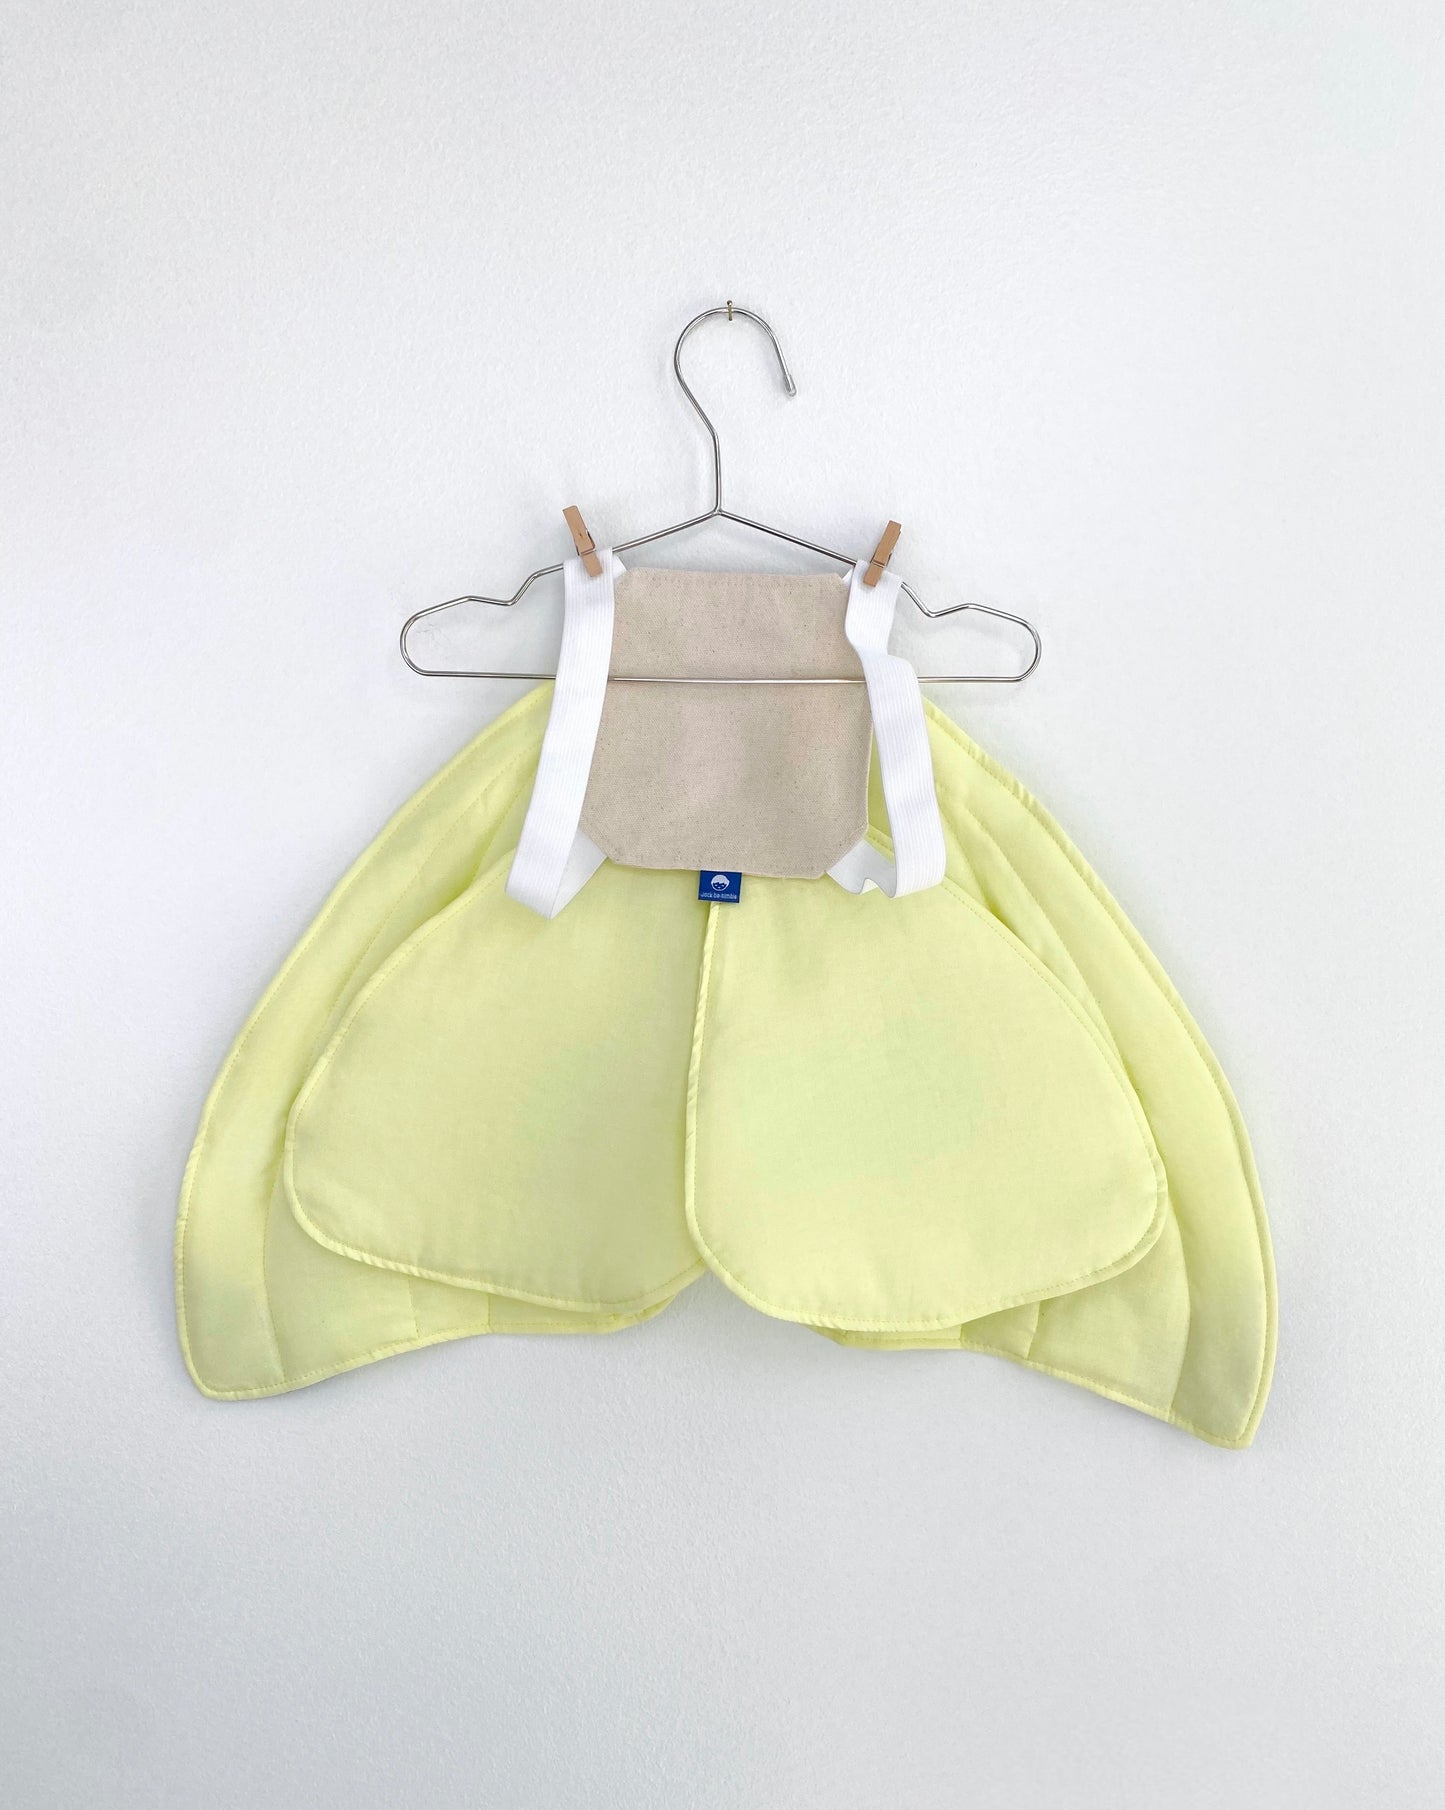 Cotton butterfly costume wings for toddlers.